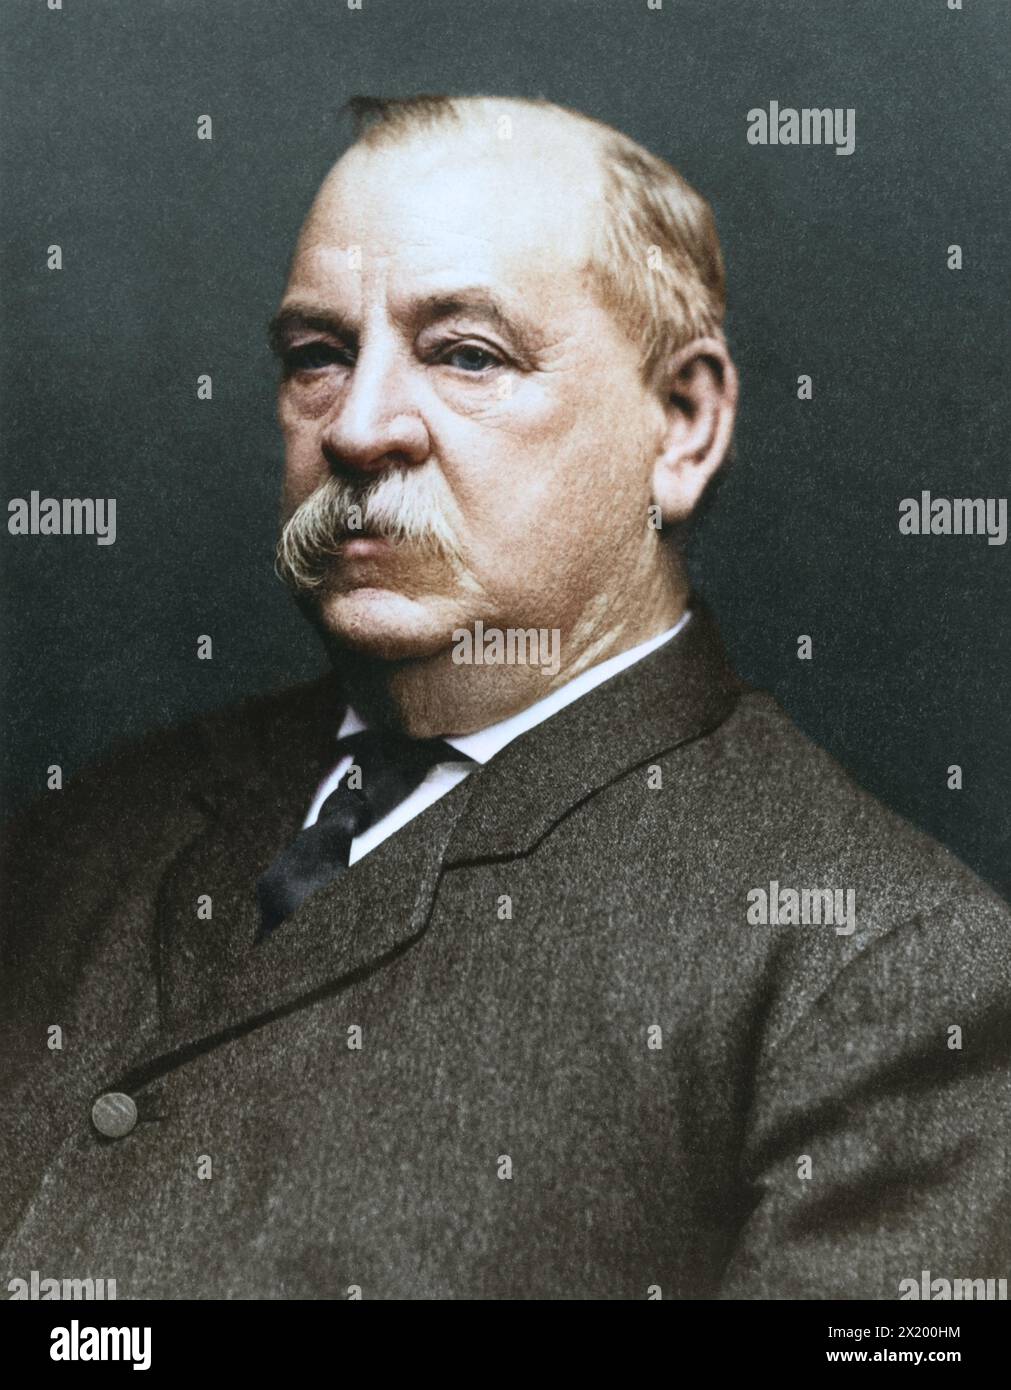 Grover Cleveland. By Pach Brothers Studio. Between 1904. Stock Photo